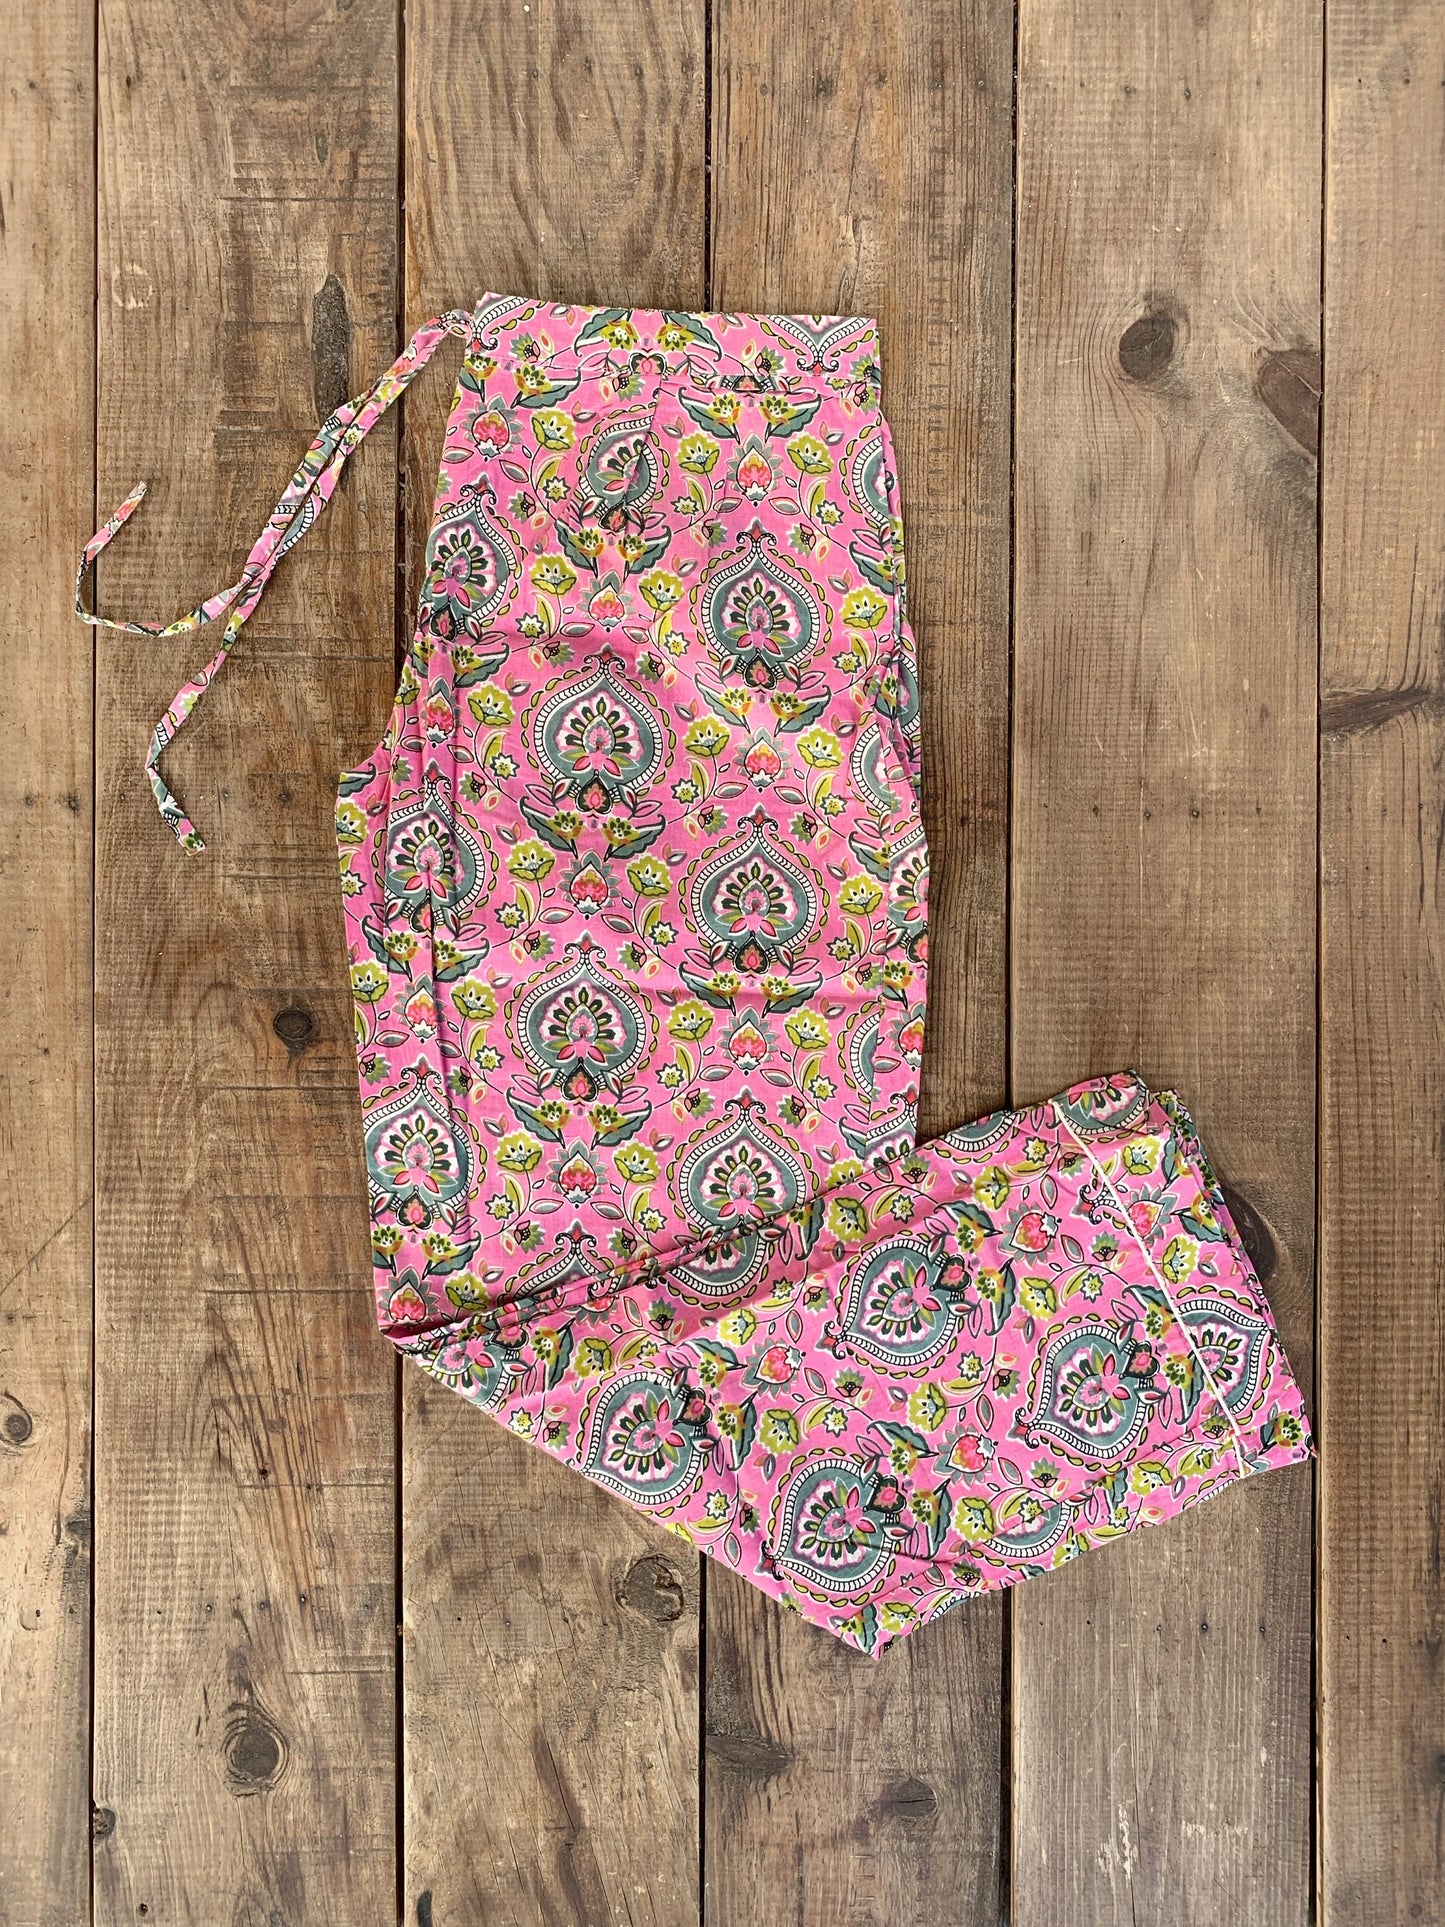 Gift SET Long-sleeved pajamas/trousers and matching slippers Pure cotton block print handmade in India Pink and green